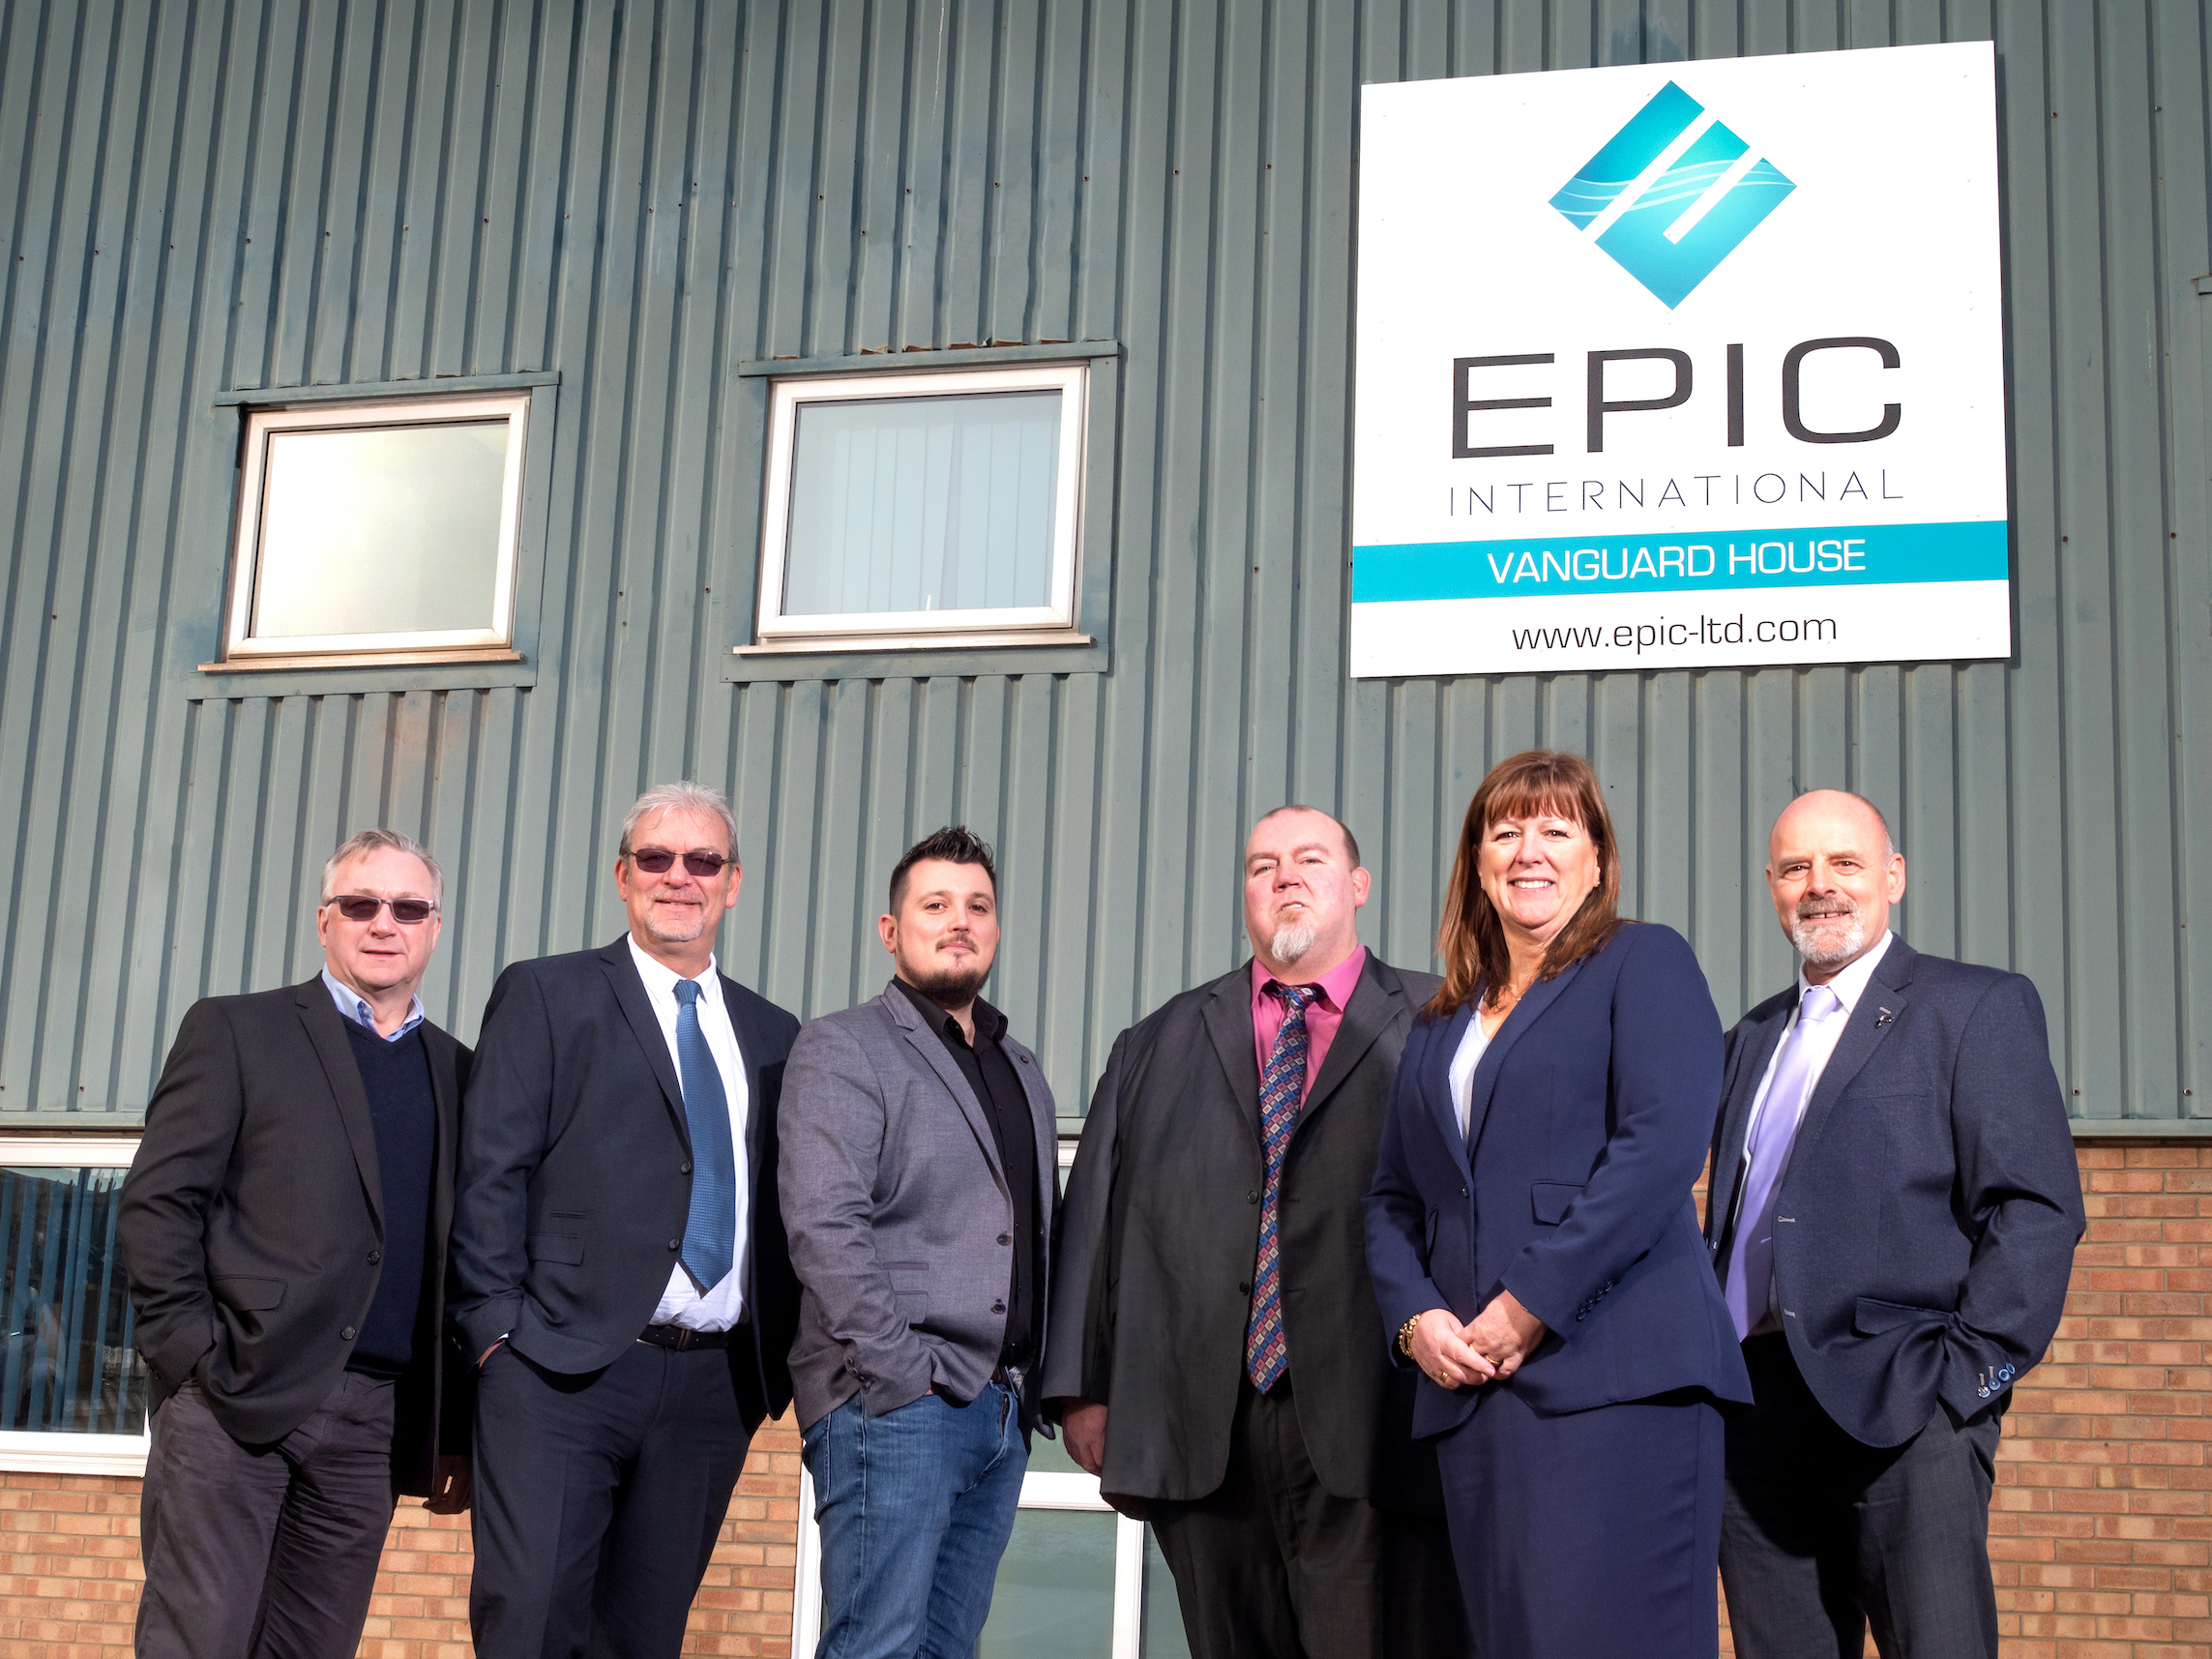 Epic International’s new management team with the refreshed company branding. From left to right: Adrian Hak, general manager, Mick Miller, operations manager, Dane Rowan, Ian Littlewood, business development manager, Kim Rowan, managing director, and Paul Martins, finance and commercial director.